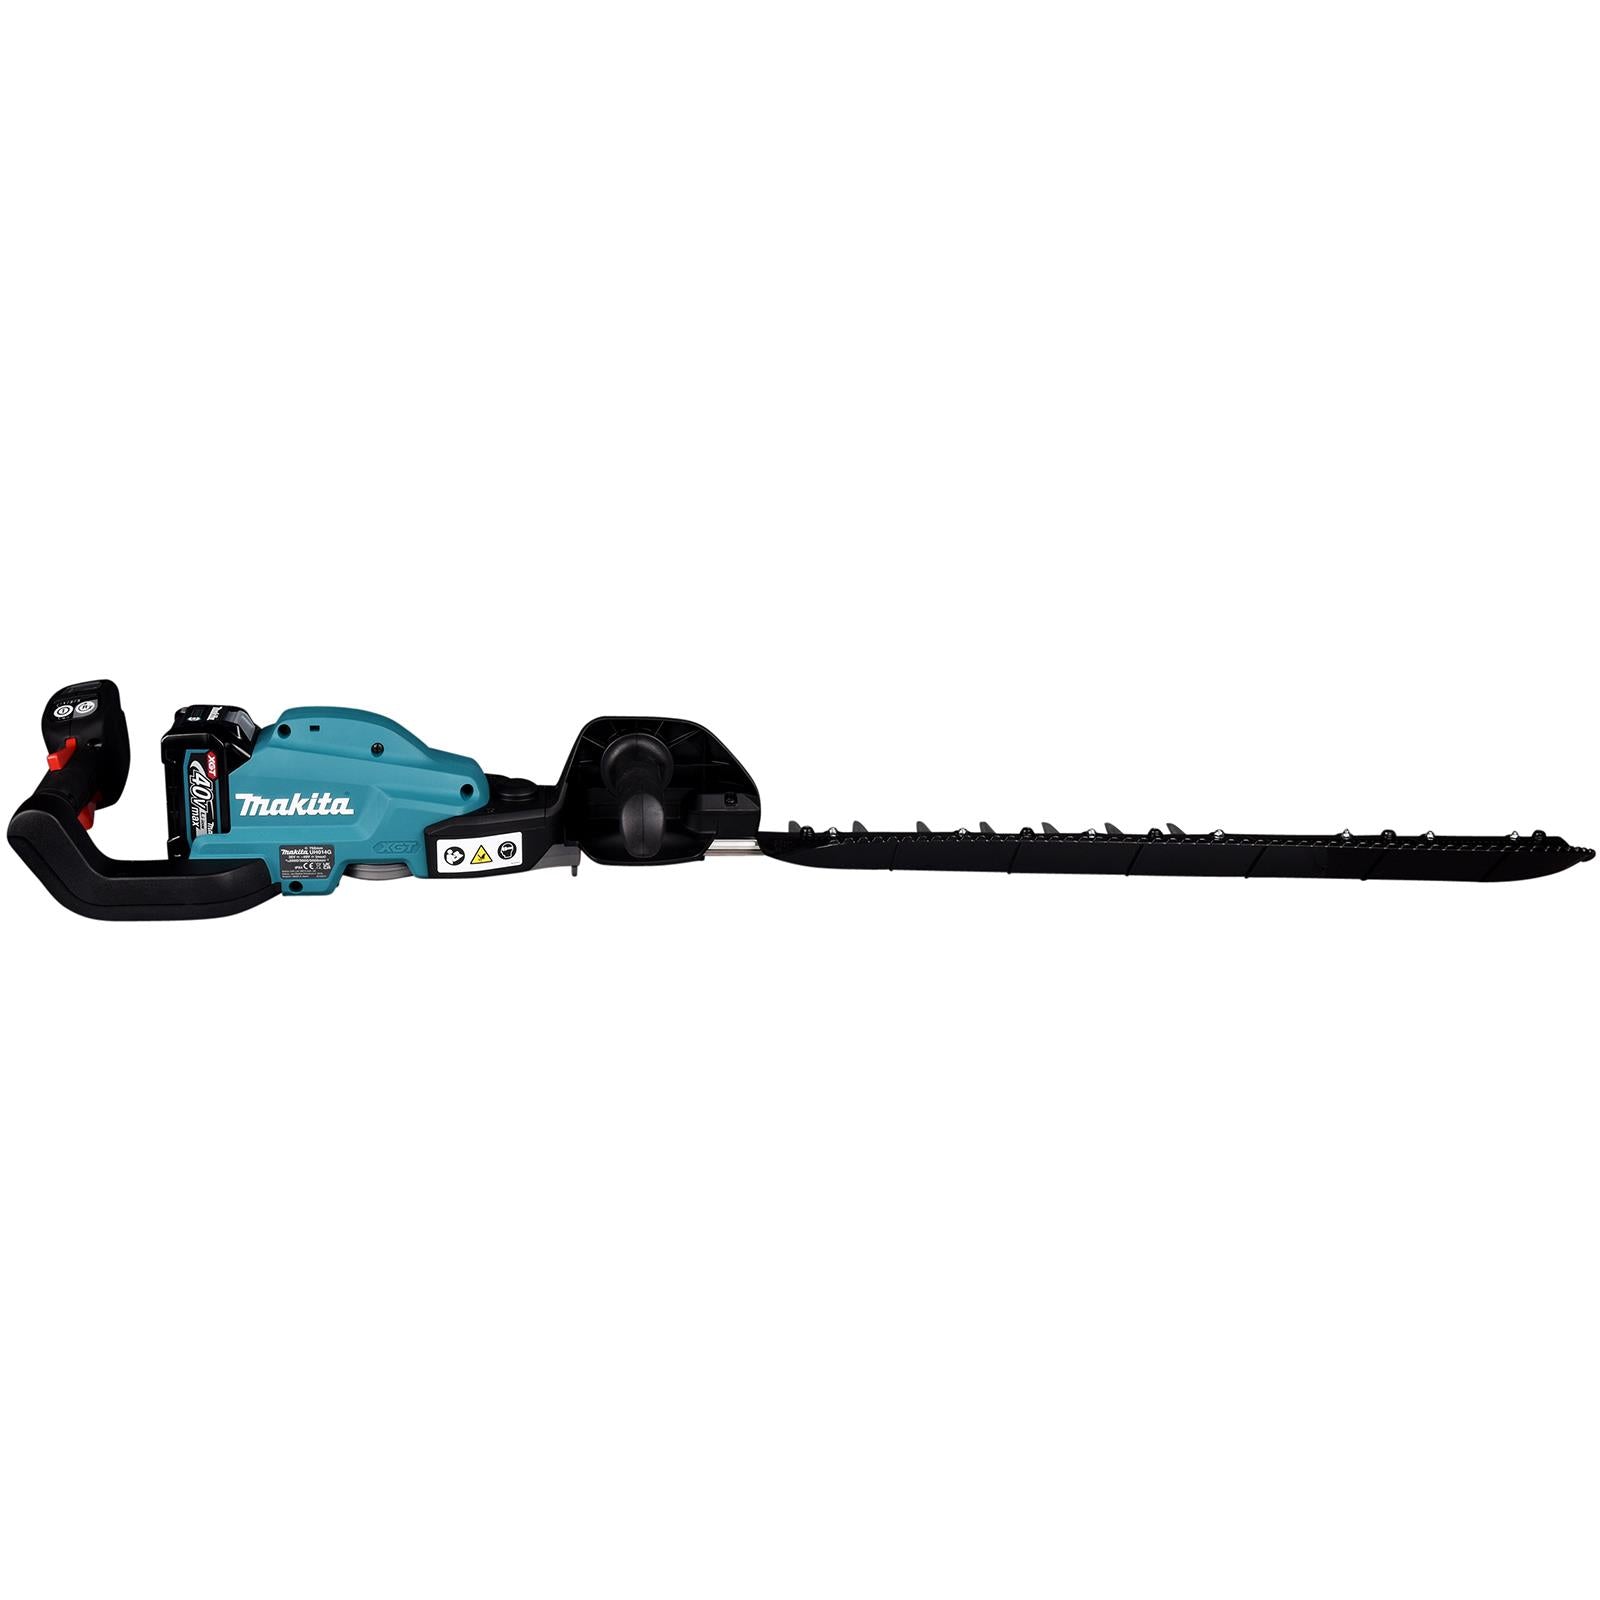 Makita Hedge Trimmer Kit 75cm 40V XGT Li-ion Brushless Cordless 2 x 2.5Ah Battery and Rapid Charger Garden Bush Cutter Cutting UH014GD202